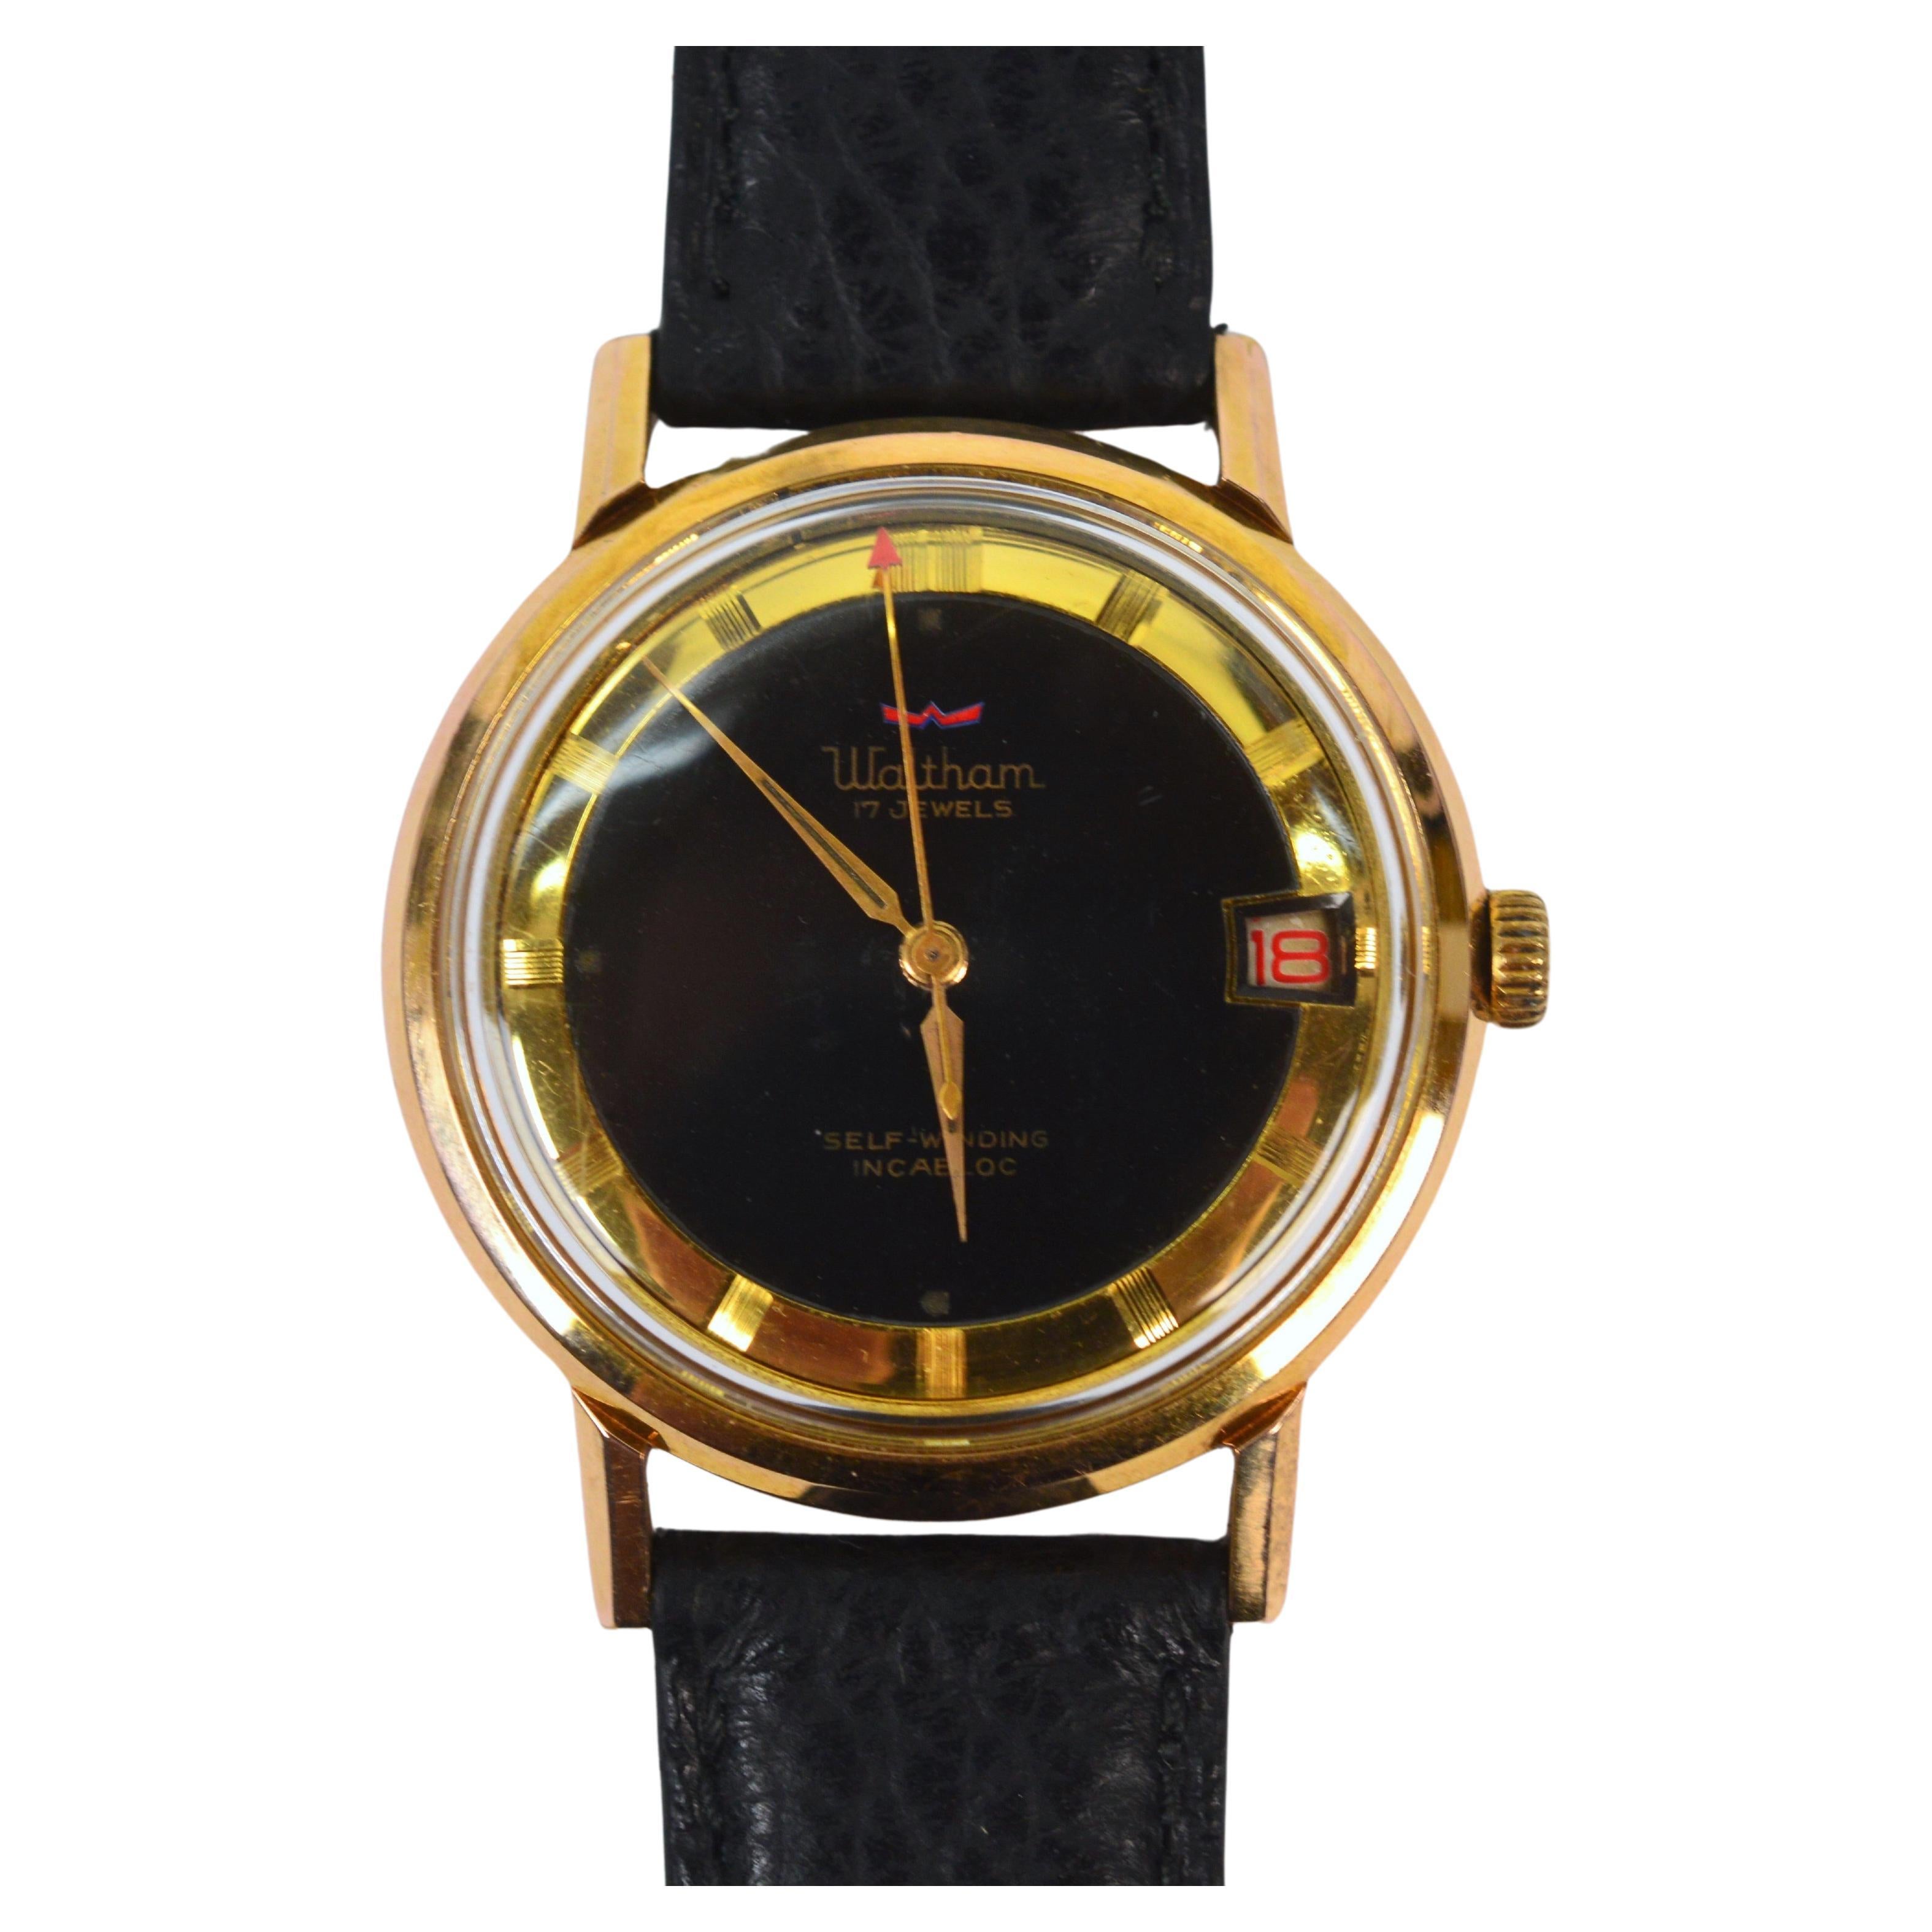 In its period and considered modernist style circa late 1950's, this 33mm vintage Waltham Men's Wrist Watch presents a sleek look with a black face,contrasting gold-toned spear hands and understated gold-tone numeral markers. The date window